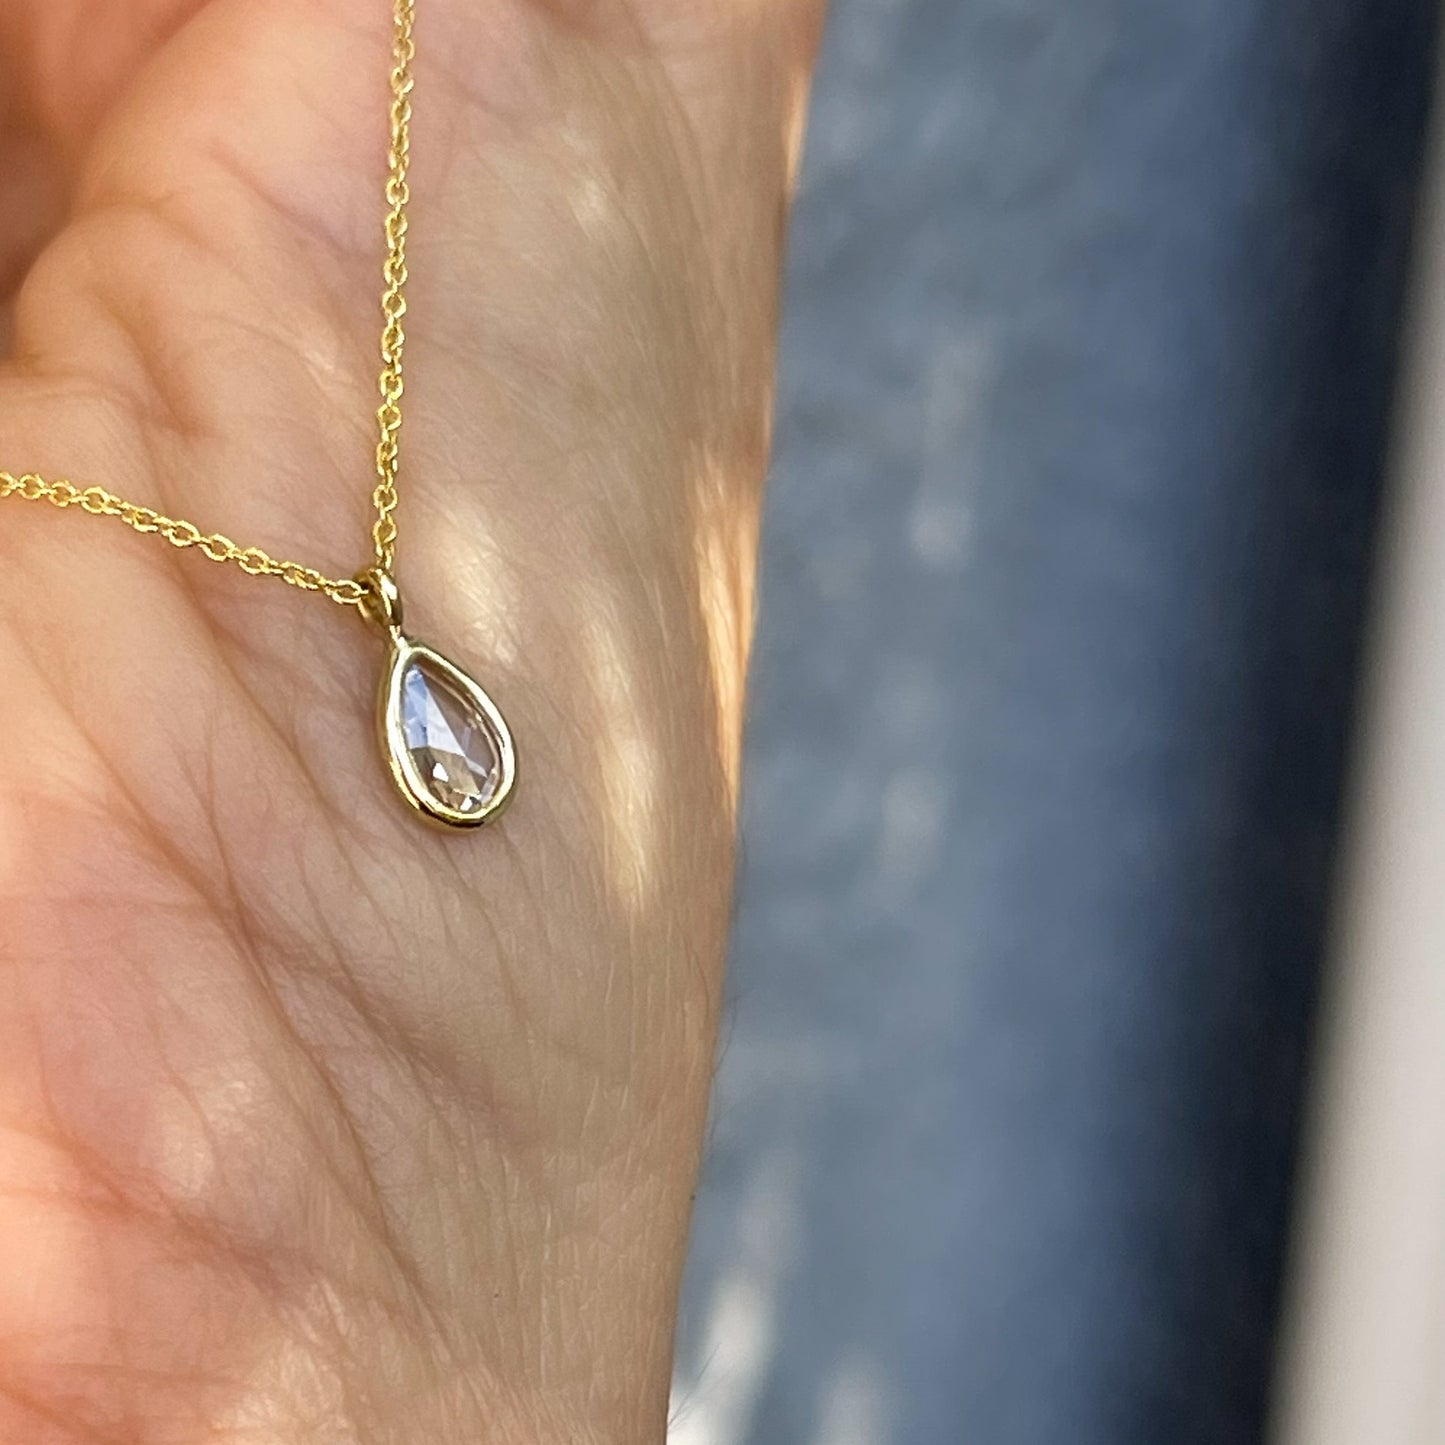 Angled view of a Dainty Diamond Necklace by NIXIN Jewelry made as a pendant with a bezel setting.